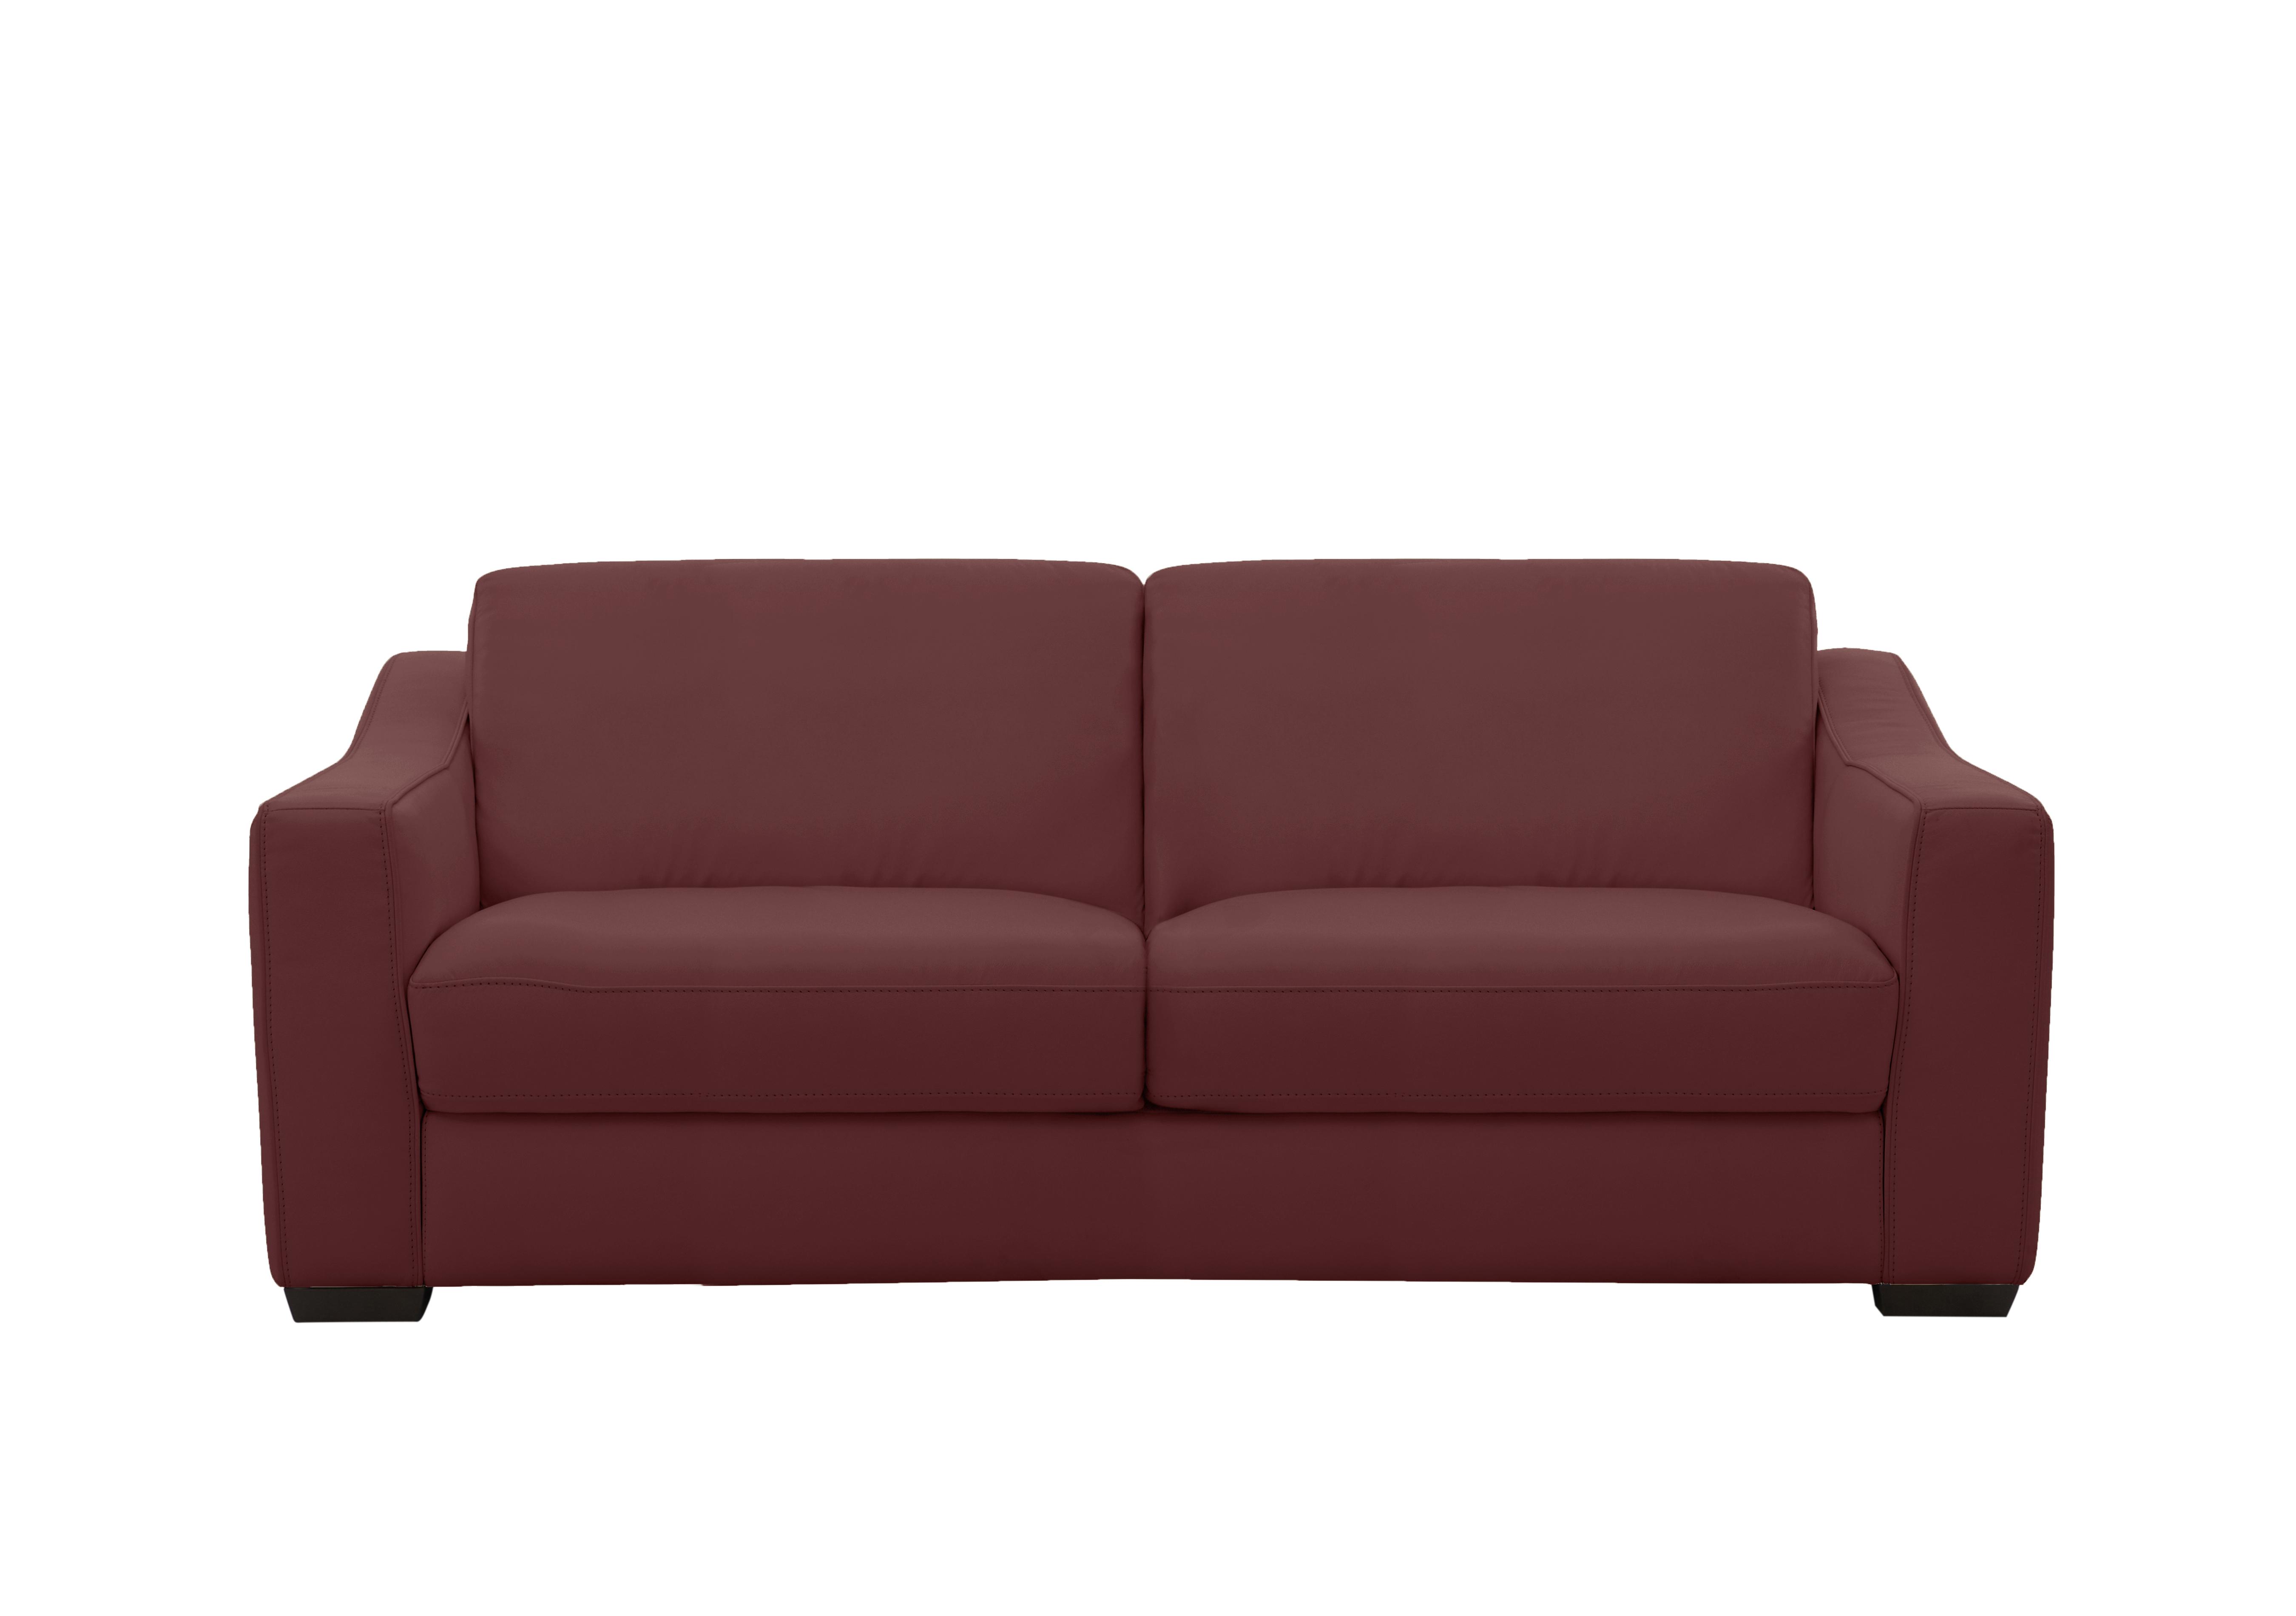 Optimus 3 Seater Leather Sofa in Bv-035c Deep Red on Furniture Village